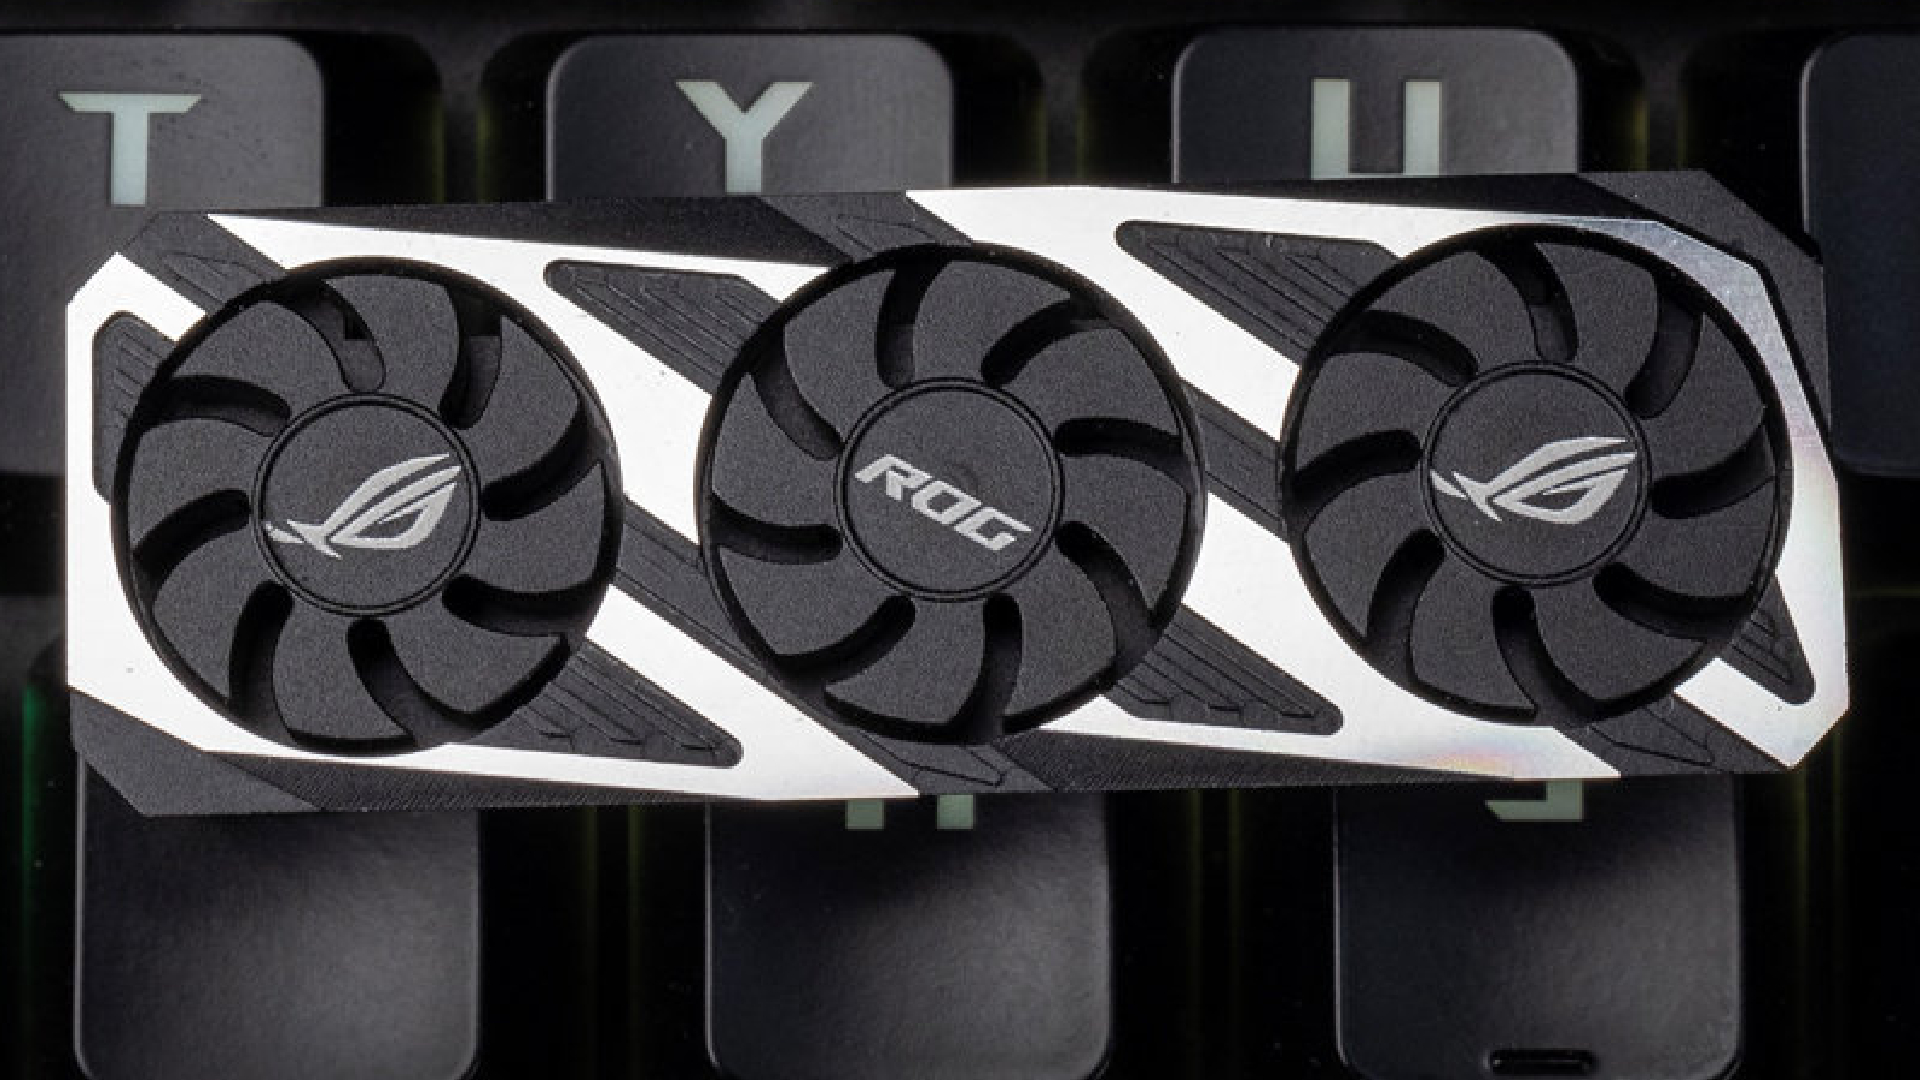 The Nvidia GeForce RTX 3080 keycap gets an Asus ROG makeover